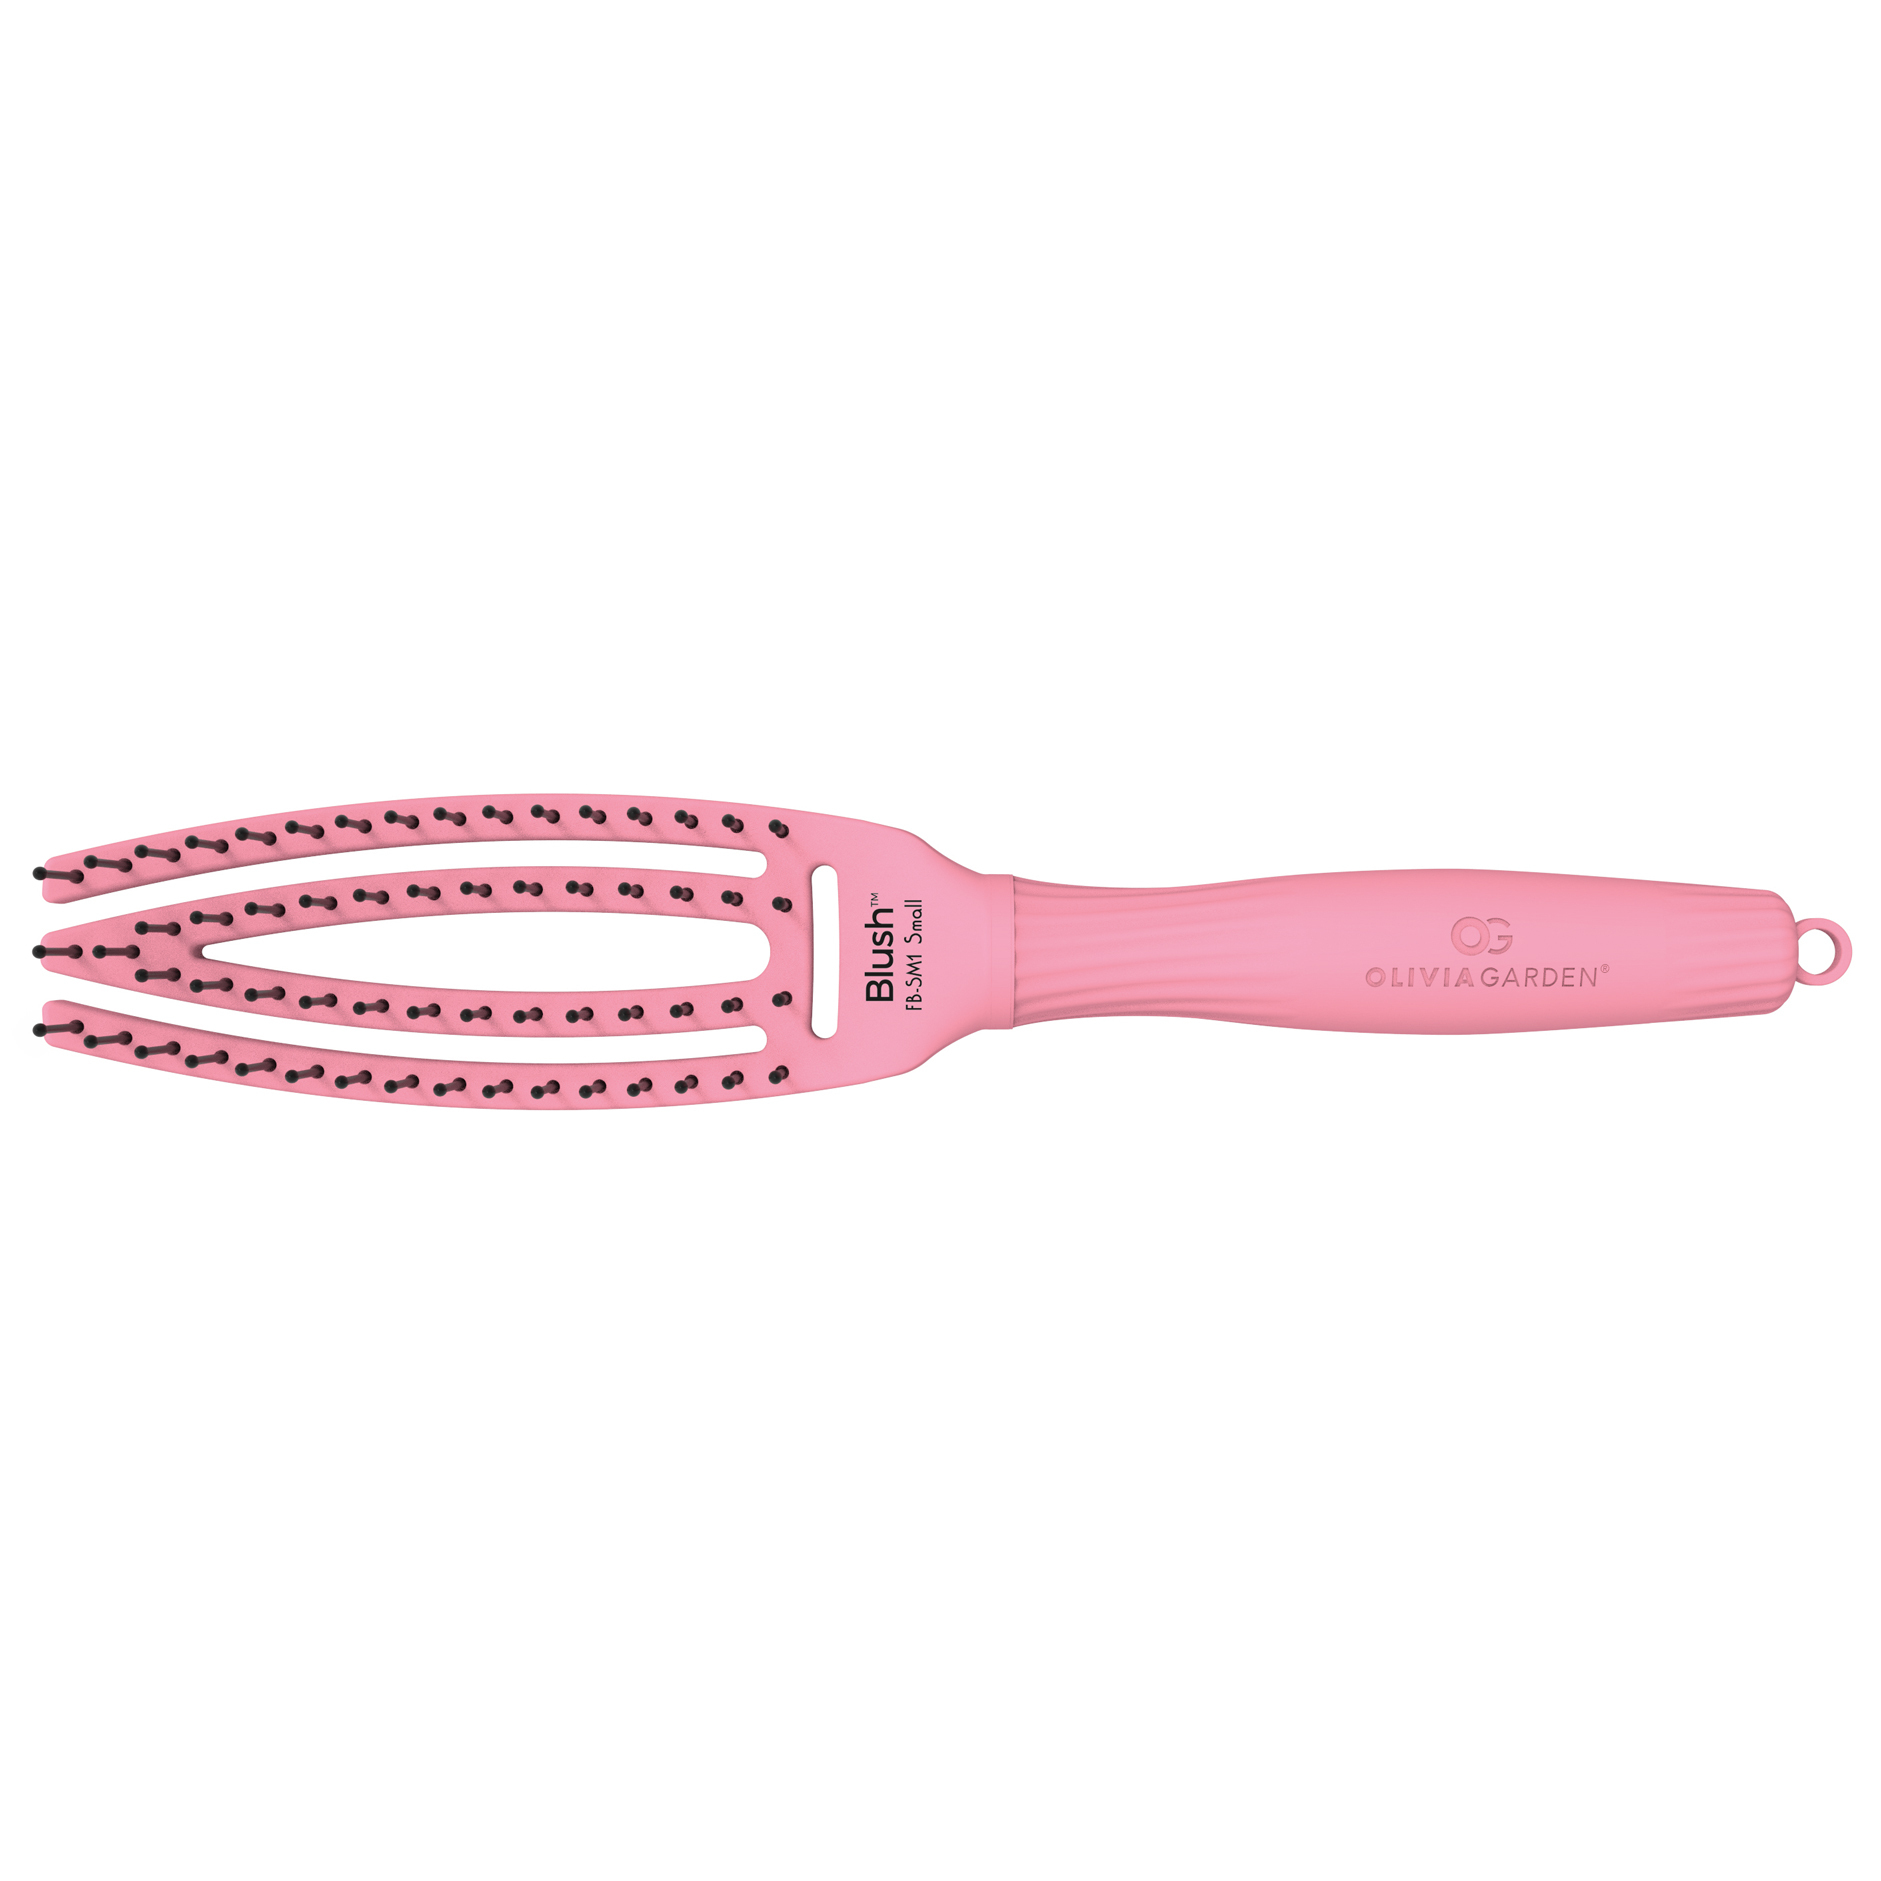 Olivia Garden Fingerbrush - Vented & Curved, Small - Blush